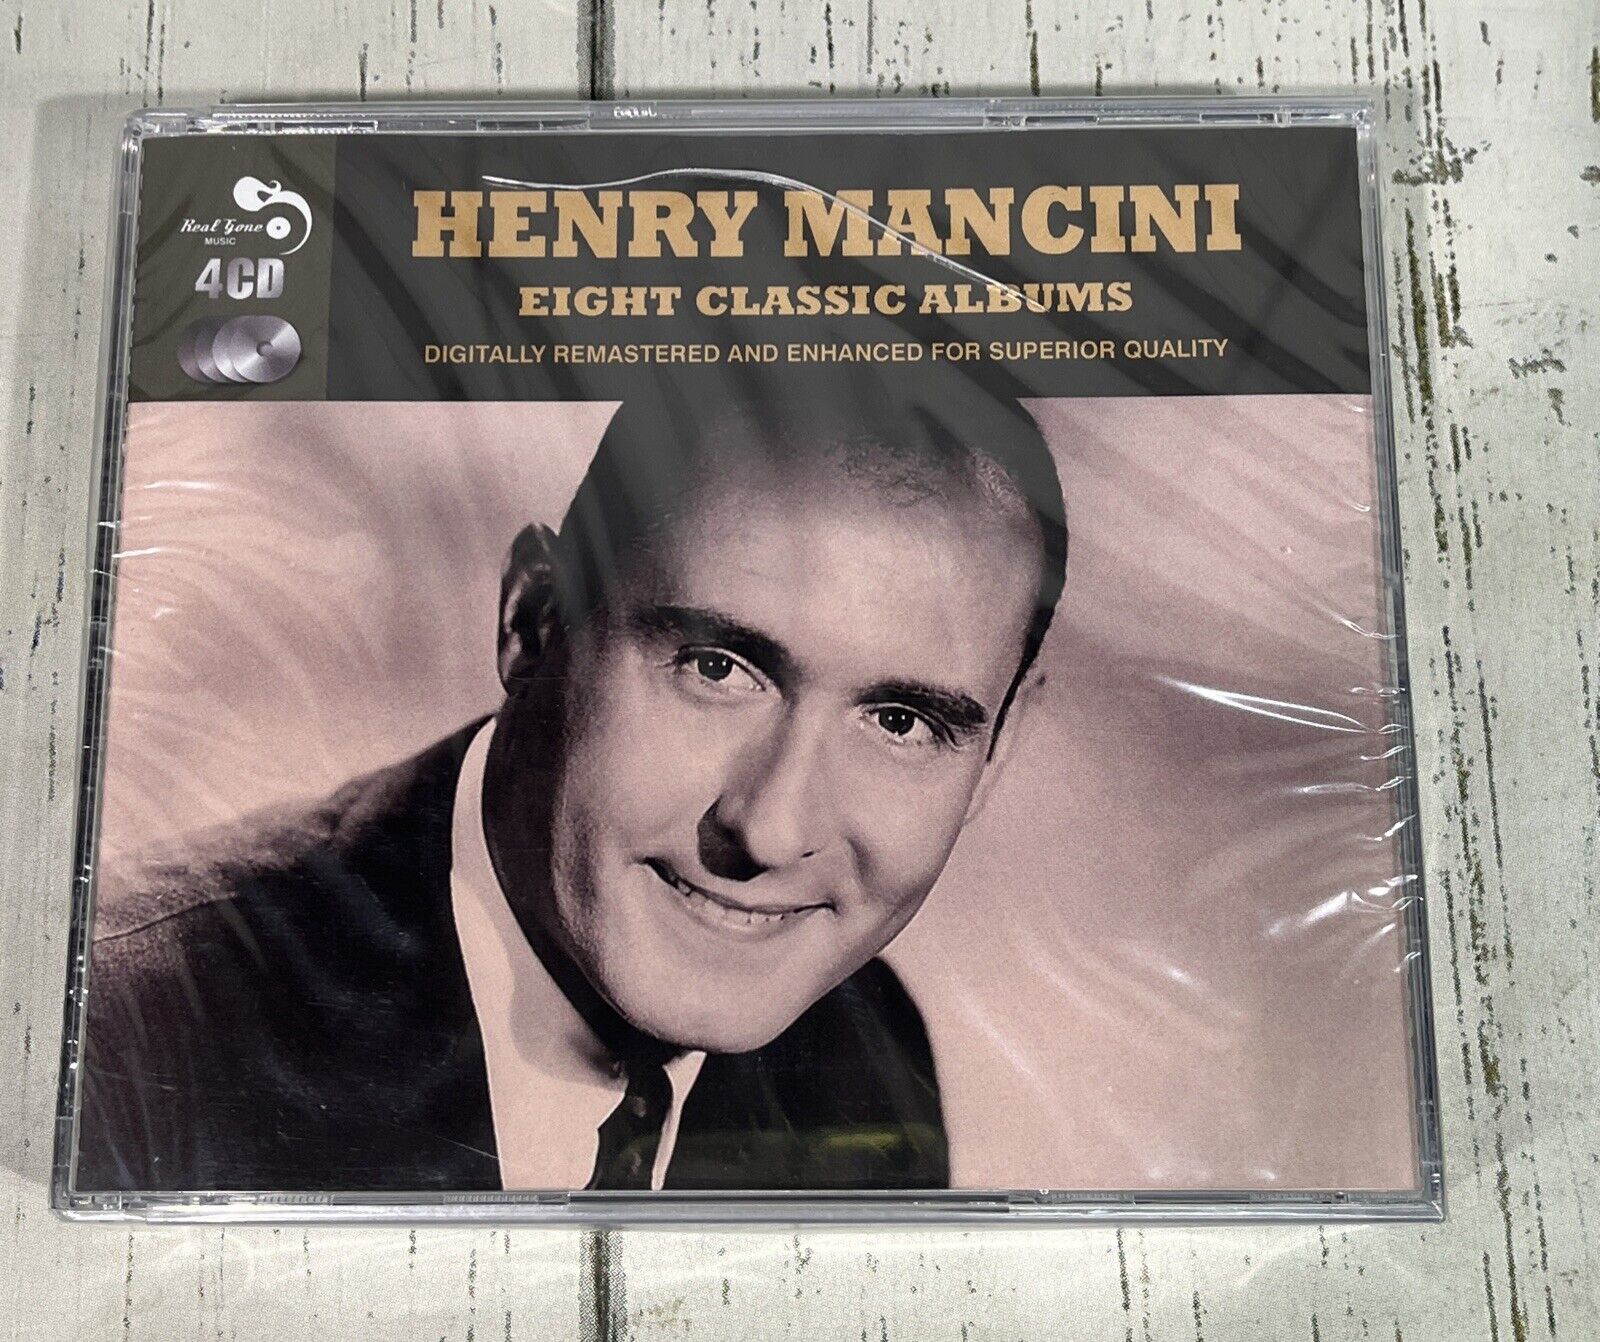 8 Classic Albums by Henry Mancini (CD, Feb-2014, Mischief Music) New Sealed